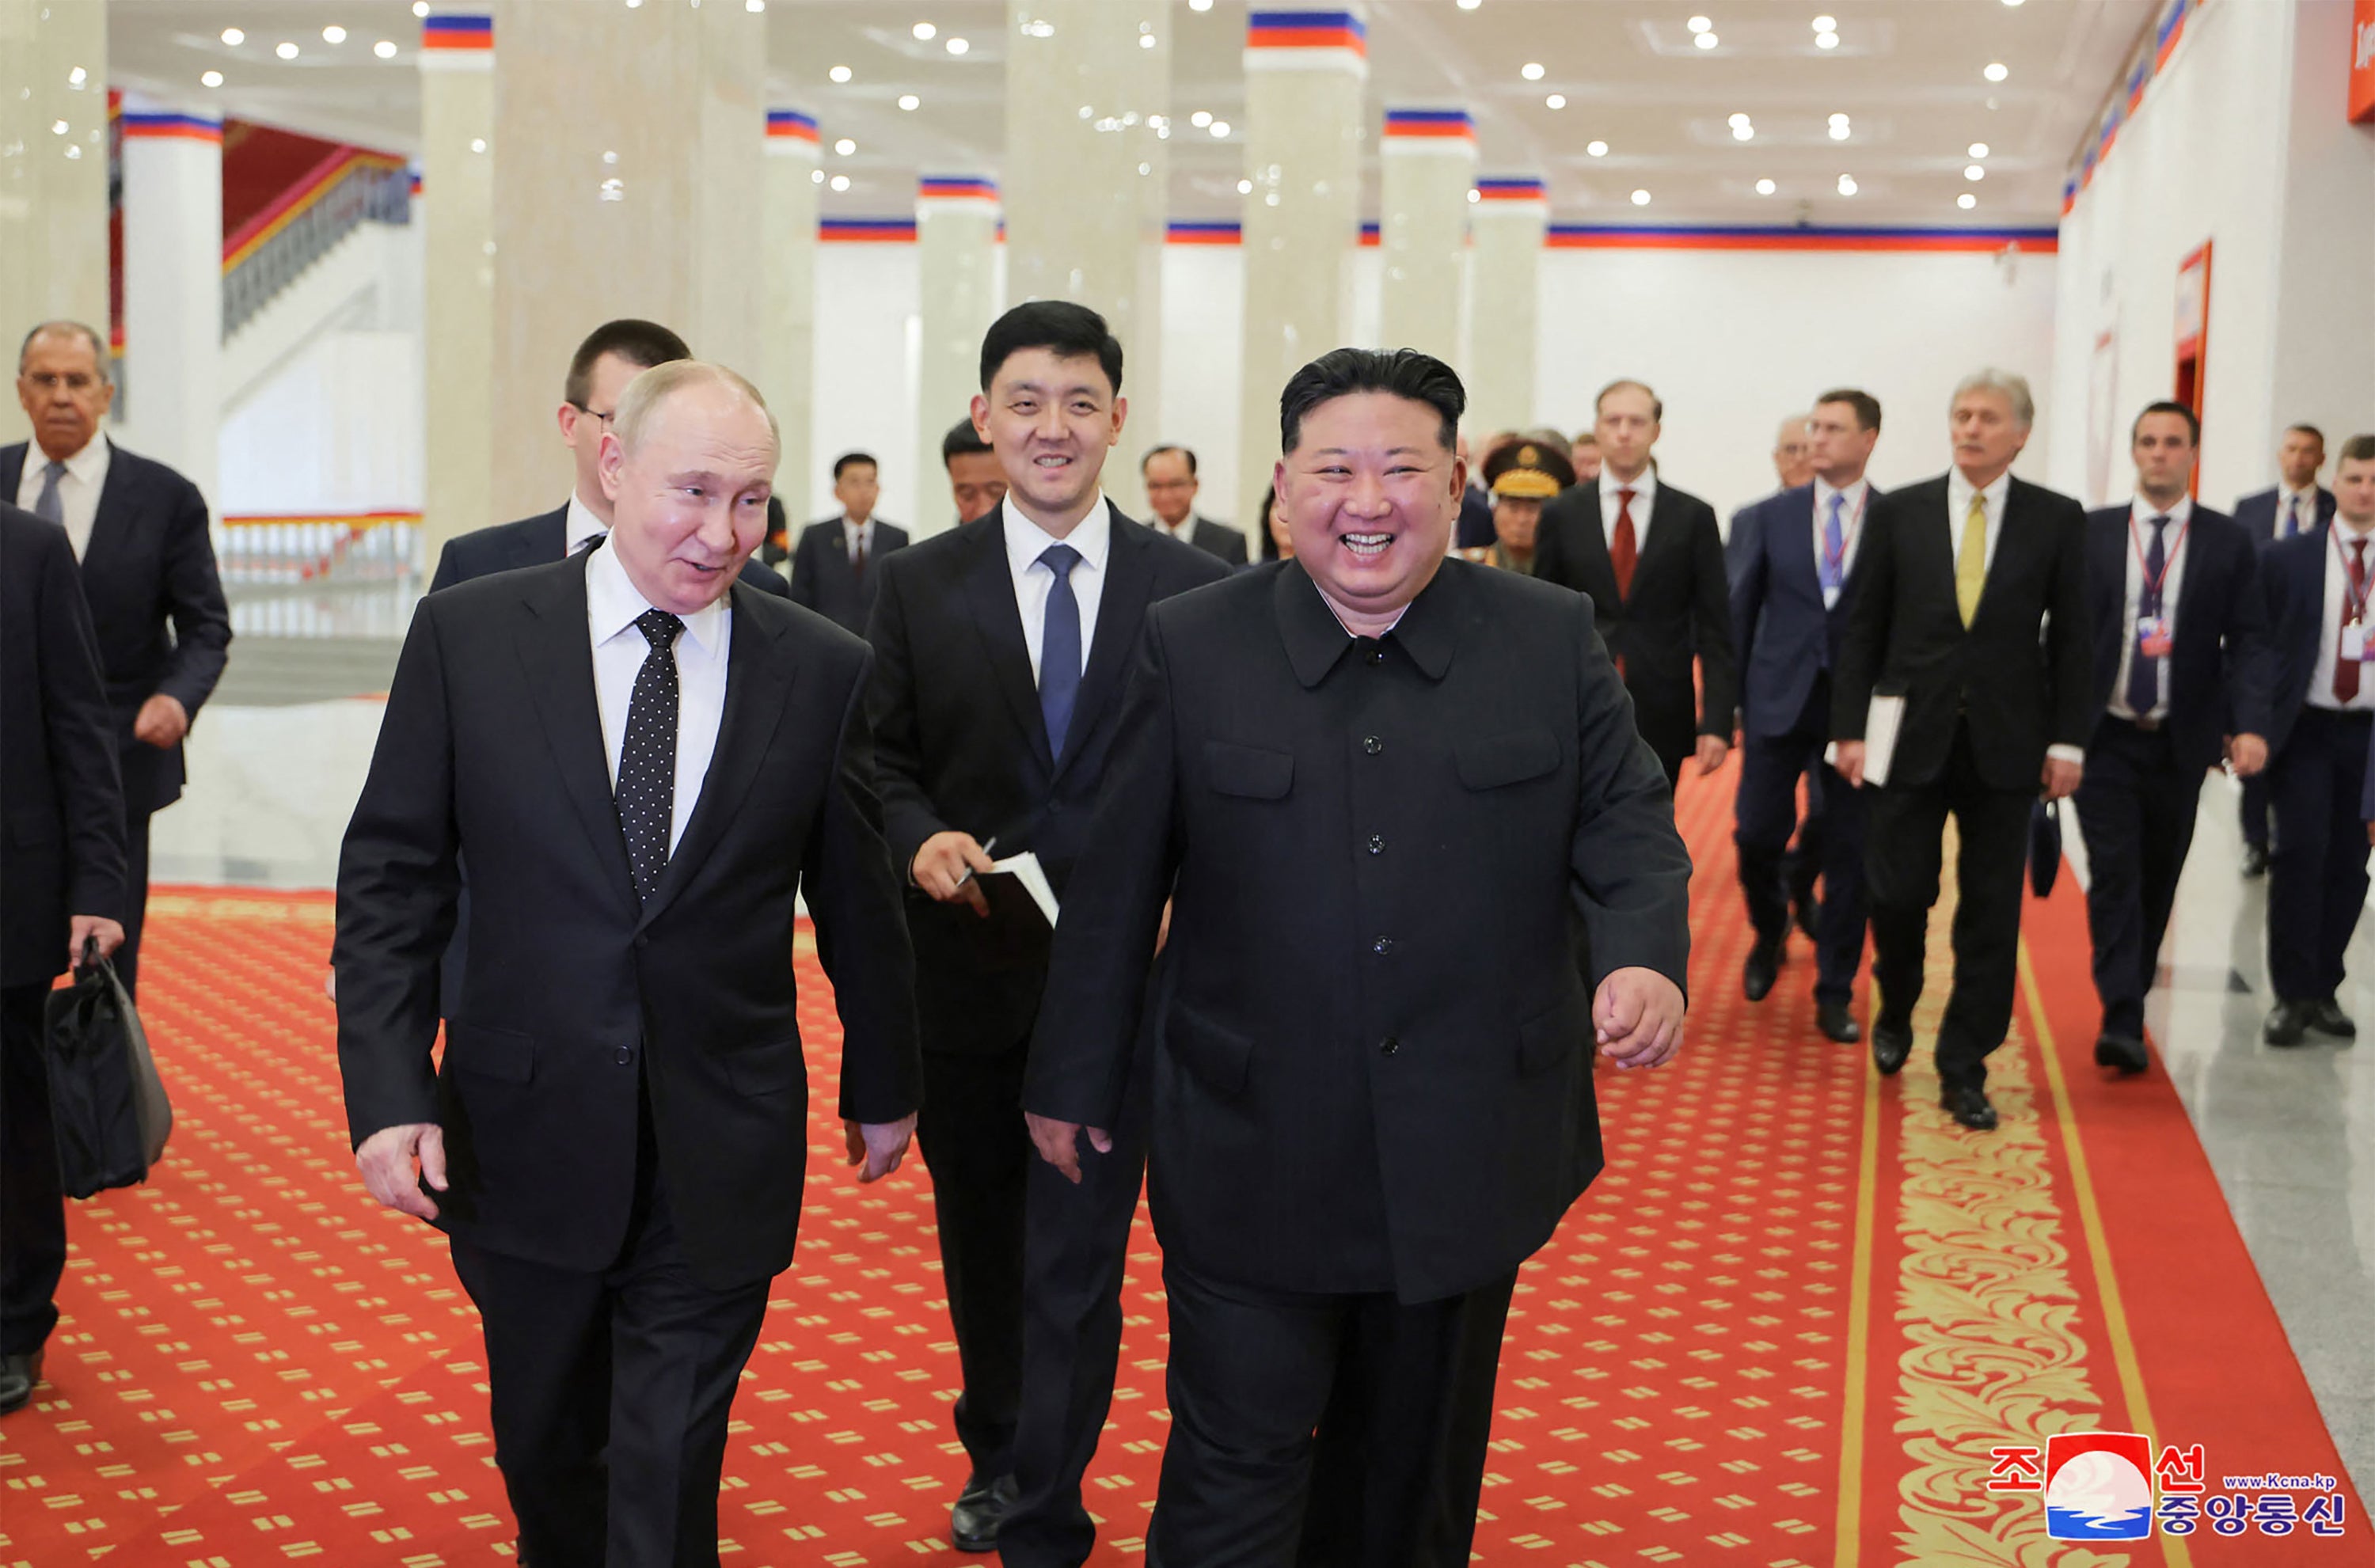 North Korea’s leader Kim Jong-un and Russia’s president Vladimir Putin speaking after watching the welcome performance at the Pyongyang Gymnasium in Pyongyang.